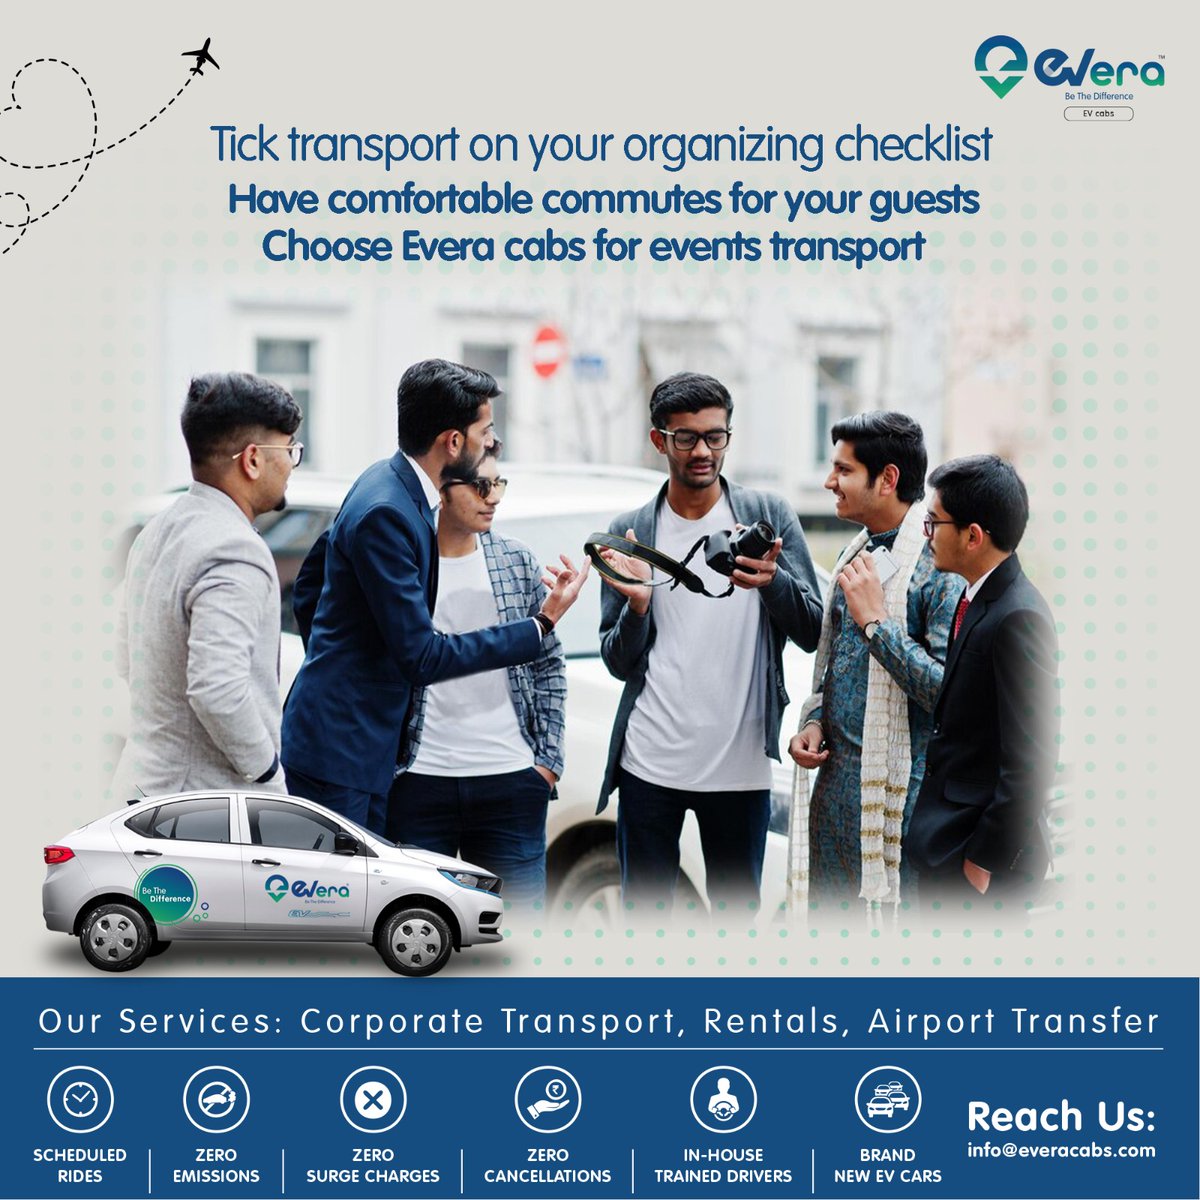 Check off transportation from your event planning list! Ensure comfortable commutes for your guests with Evera Cabs. #EventTransport #GuestComfort
@e_prakriti